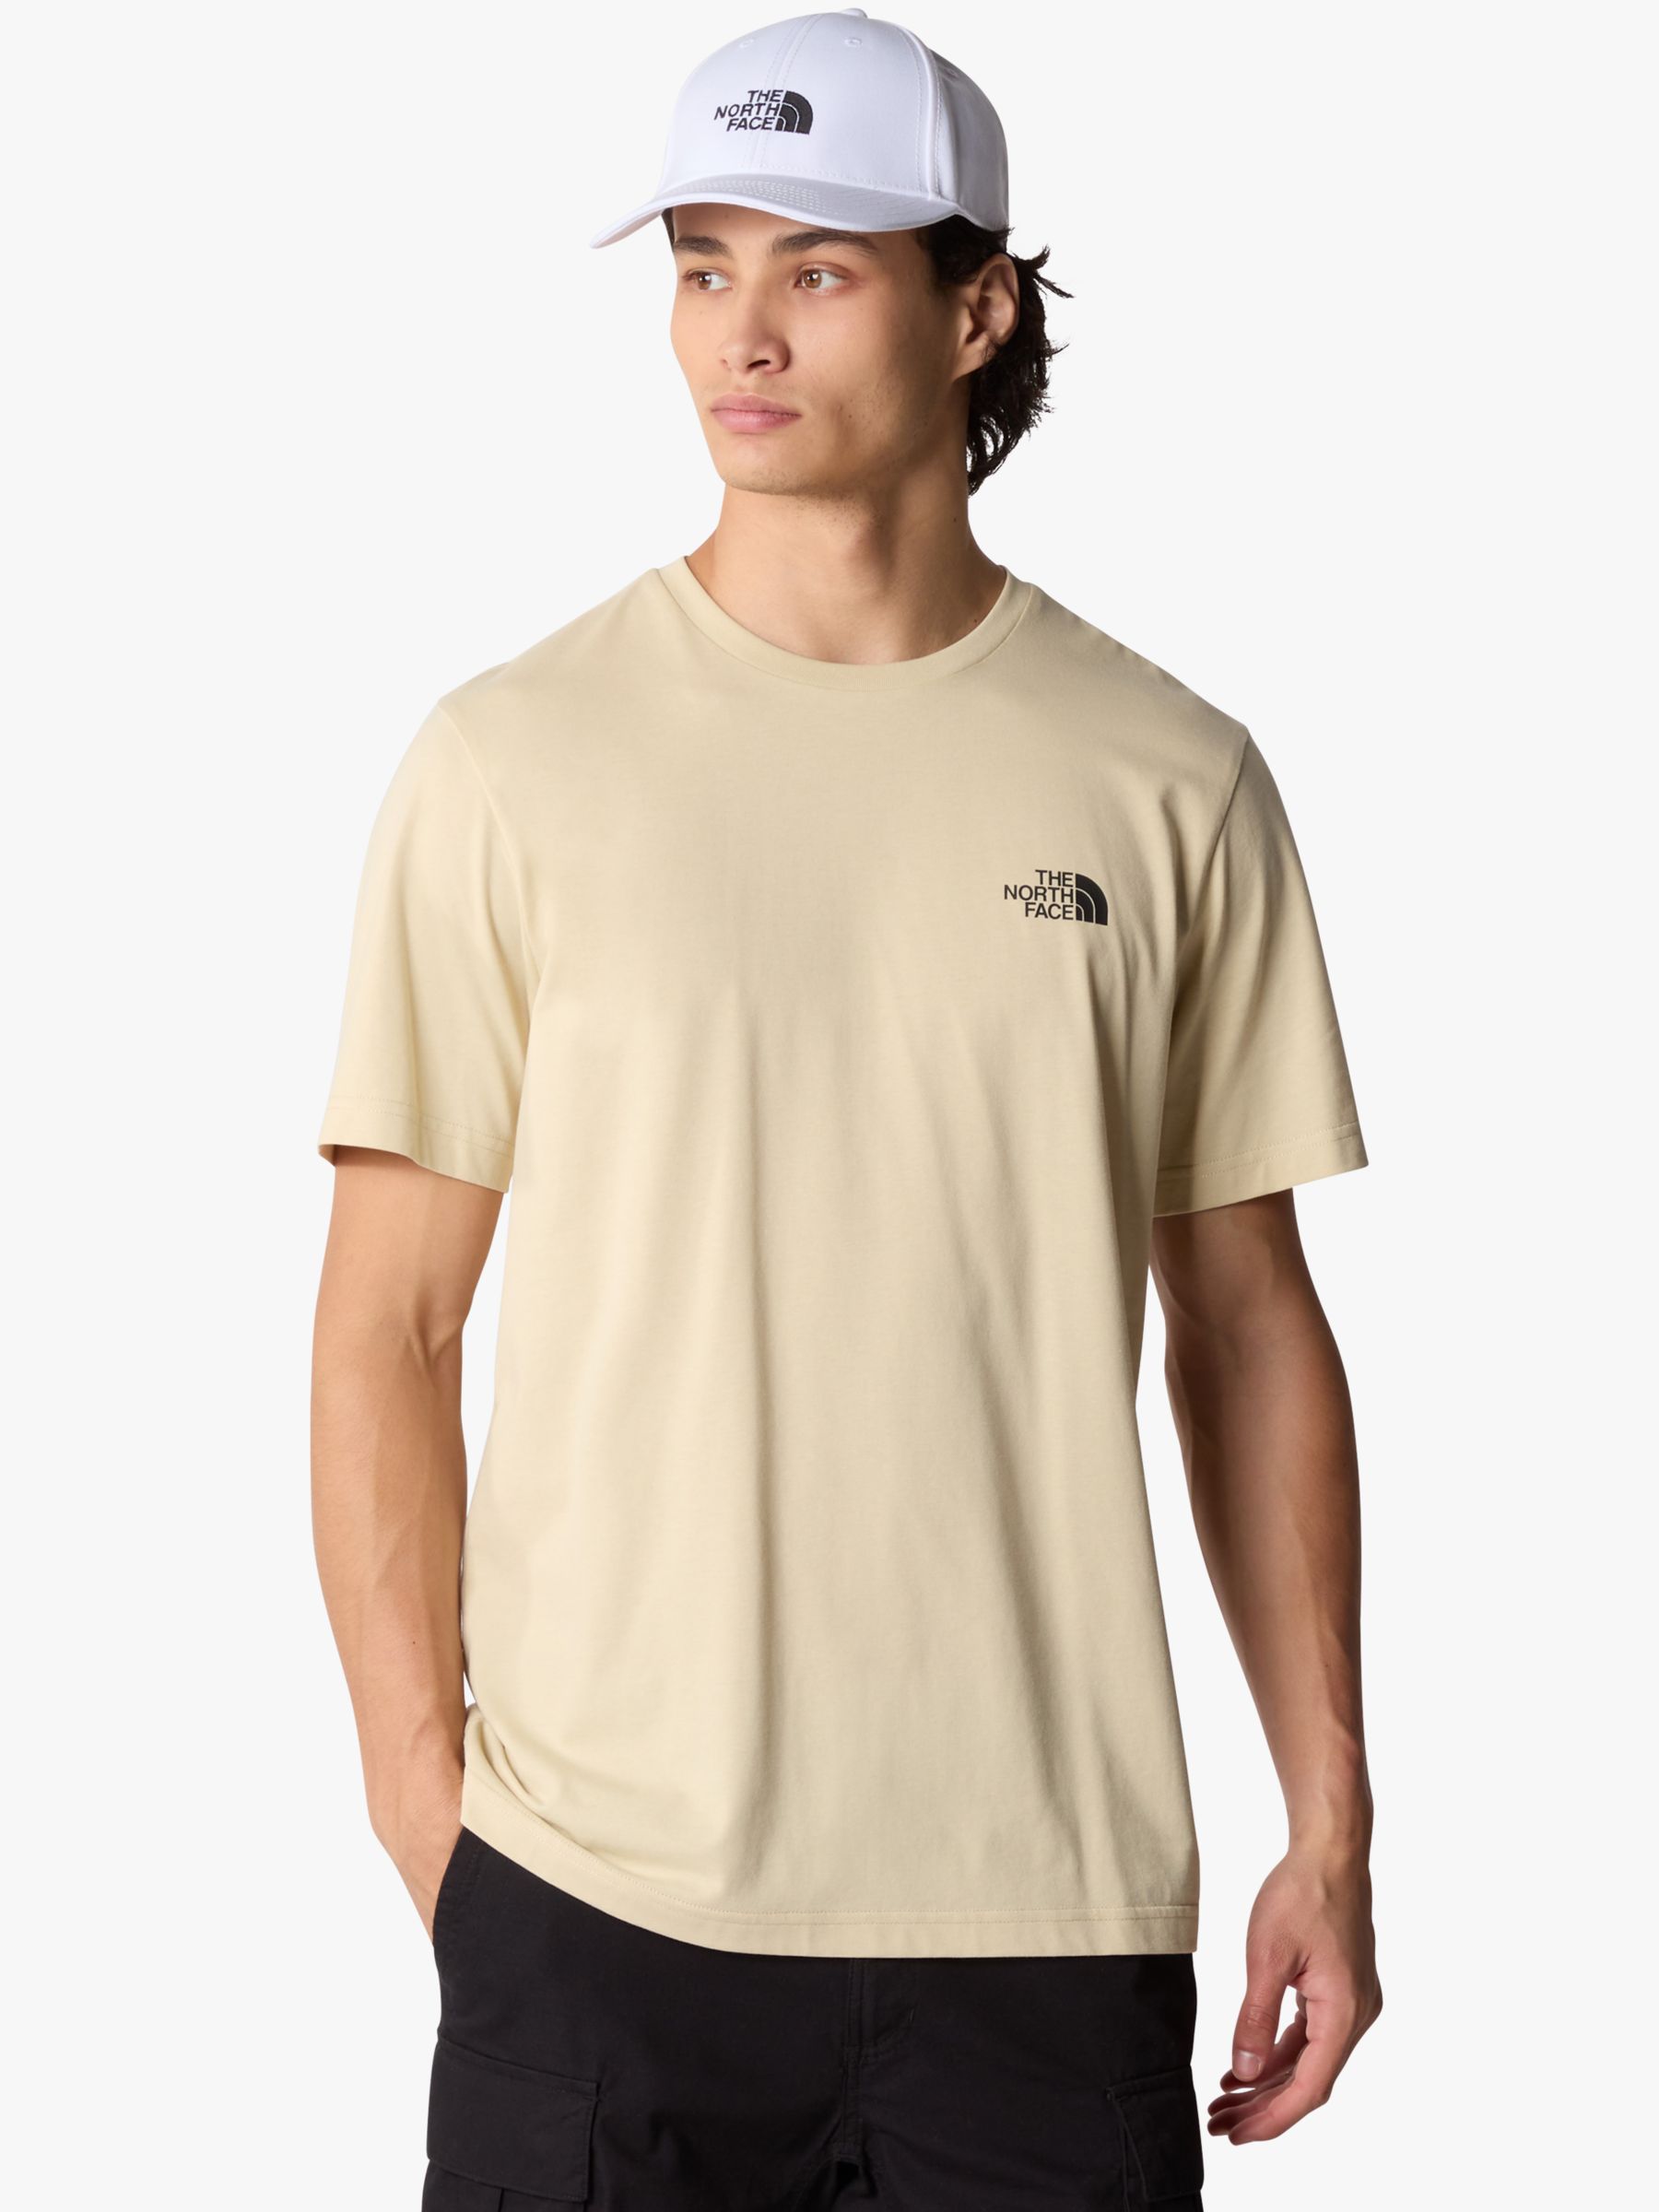 The North Face Short Sleeve Dome T-Shirt, Gravel, XL